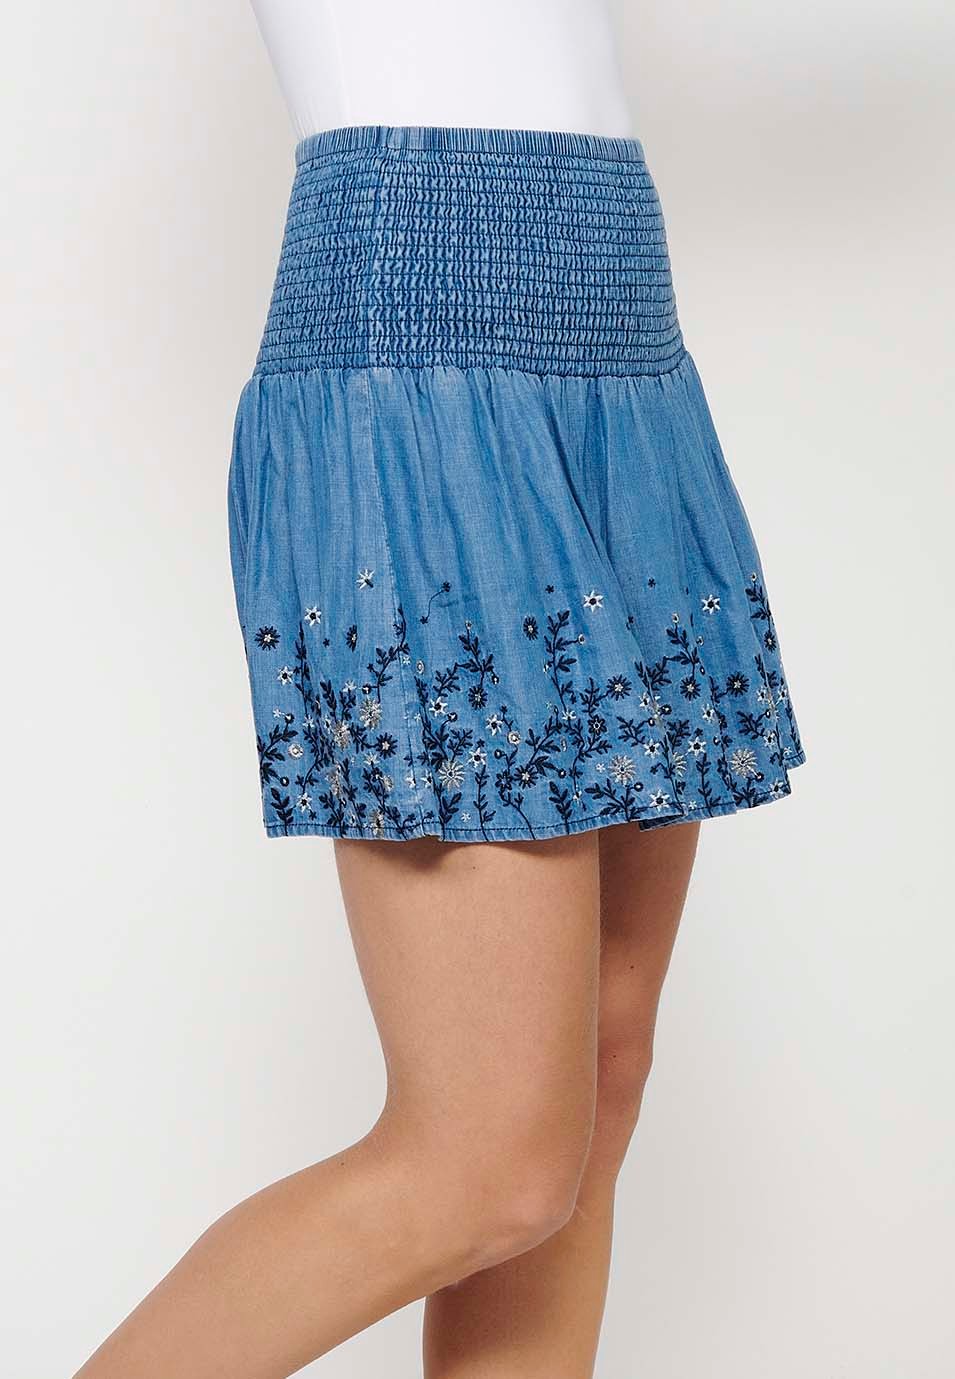 Short skirt with wide elastic waist and finished with blue floral embroidery for Women 3